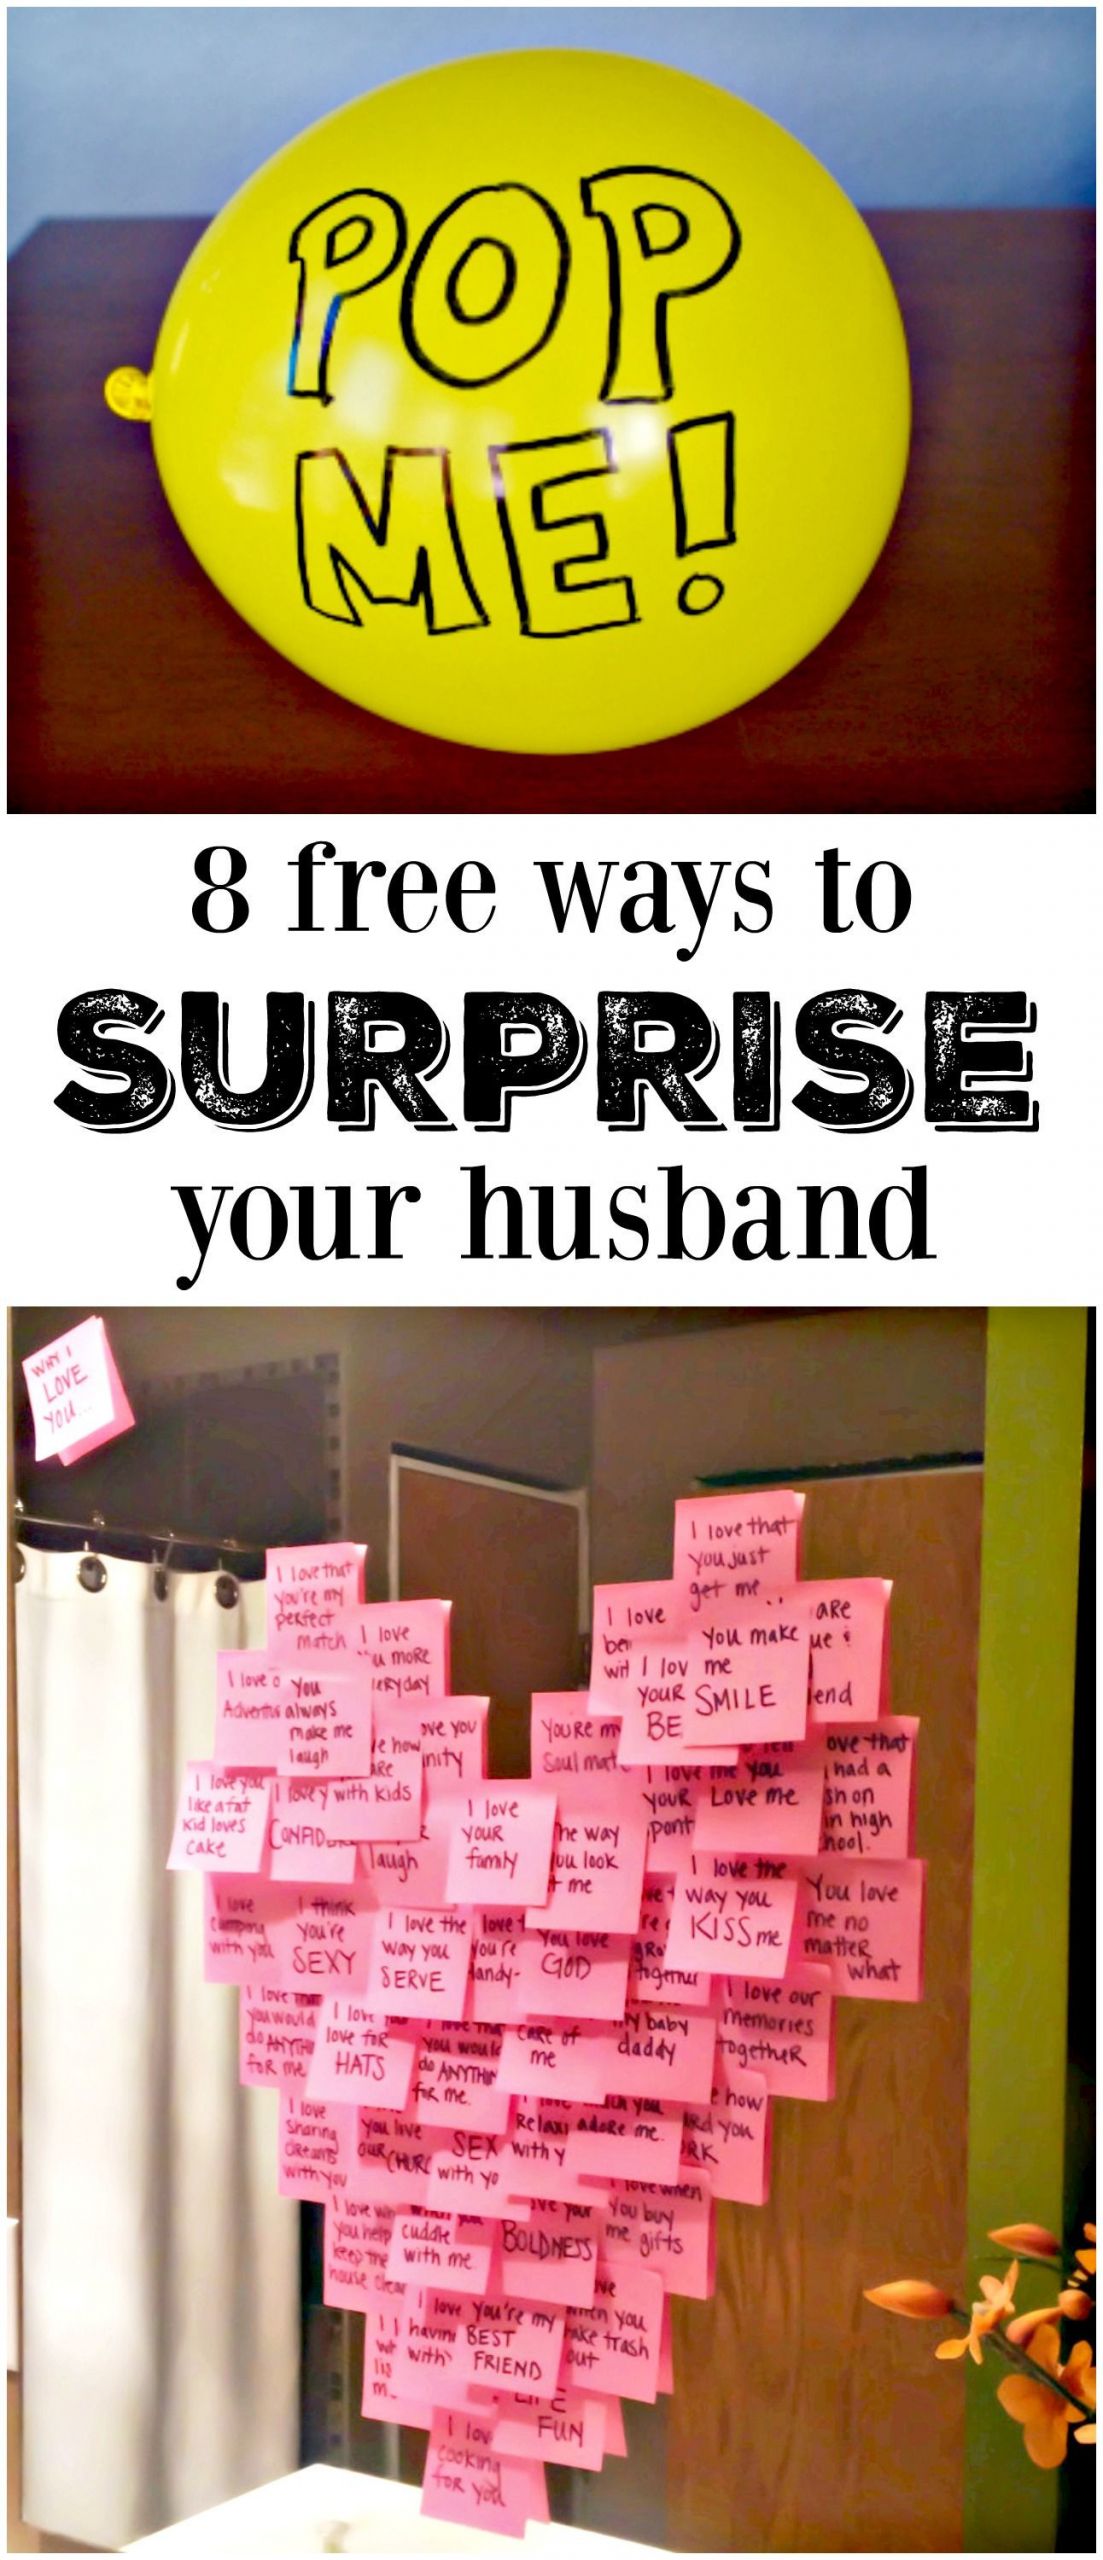 Gift Ideas For Husband Birthday
 8 Meaningful Ways to Make His Day